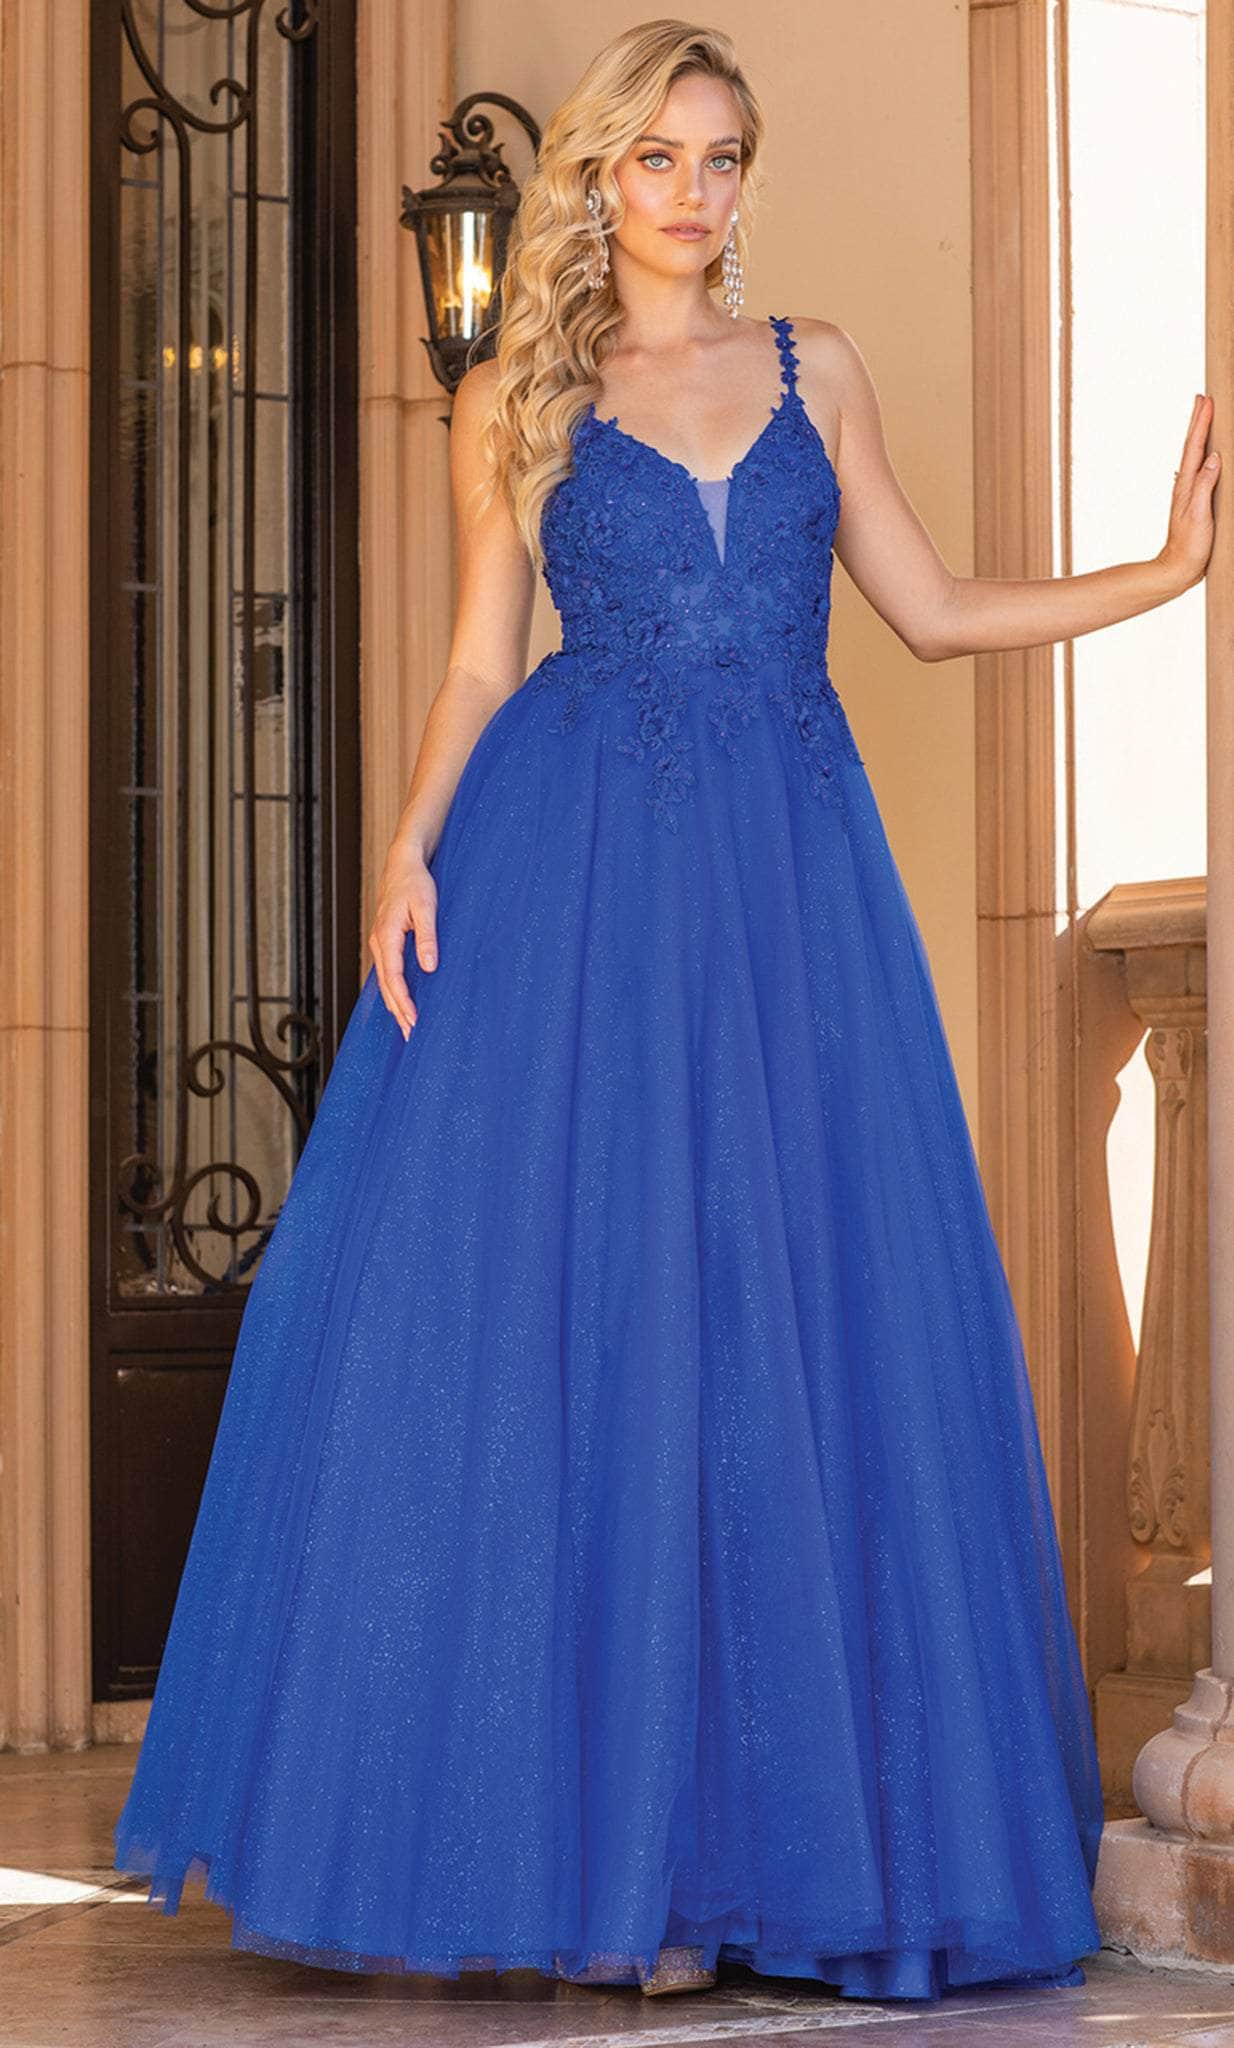 Dancing Queen 4328 Sleeveless A-Line Prom Gown Special Occasion Dresses